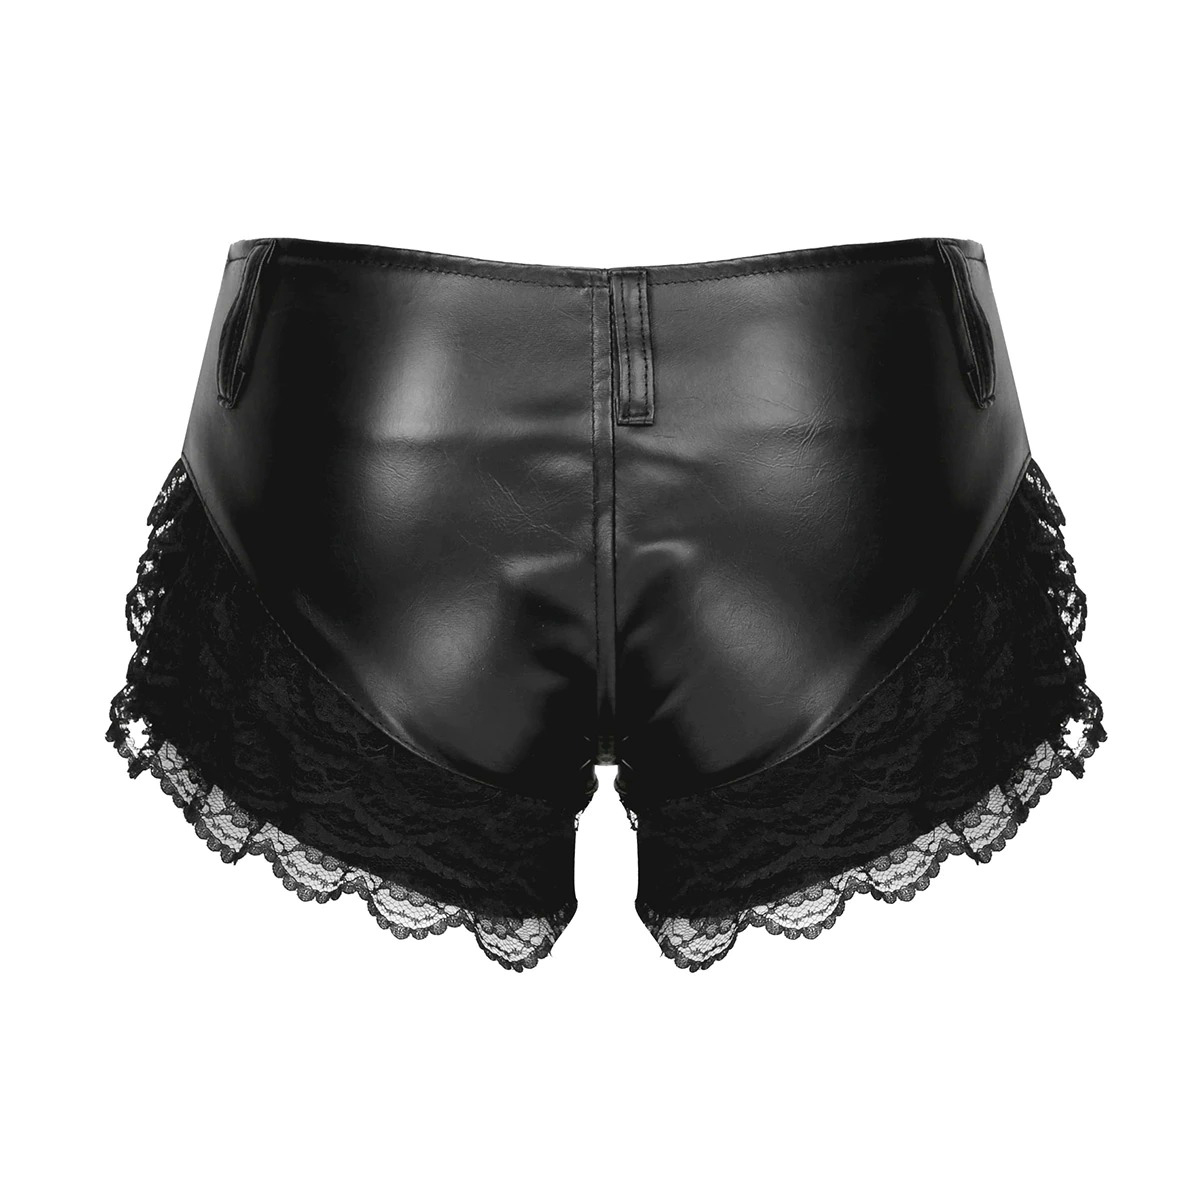 Women's PU Leather Shorts with Low Waist / Ladies Sexy Lace Shorts for Adult - EVE's SECRETS